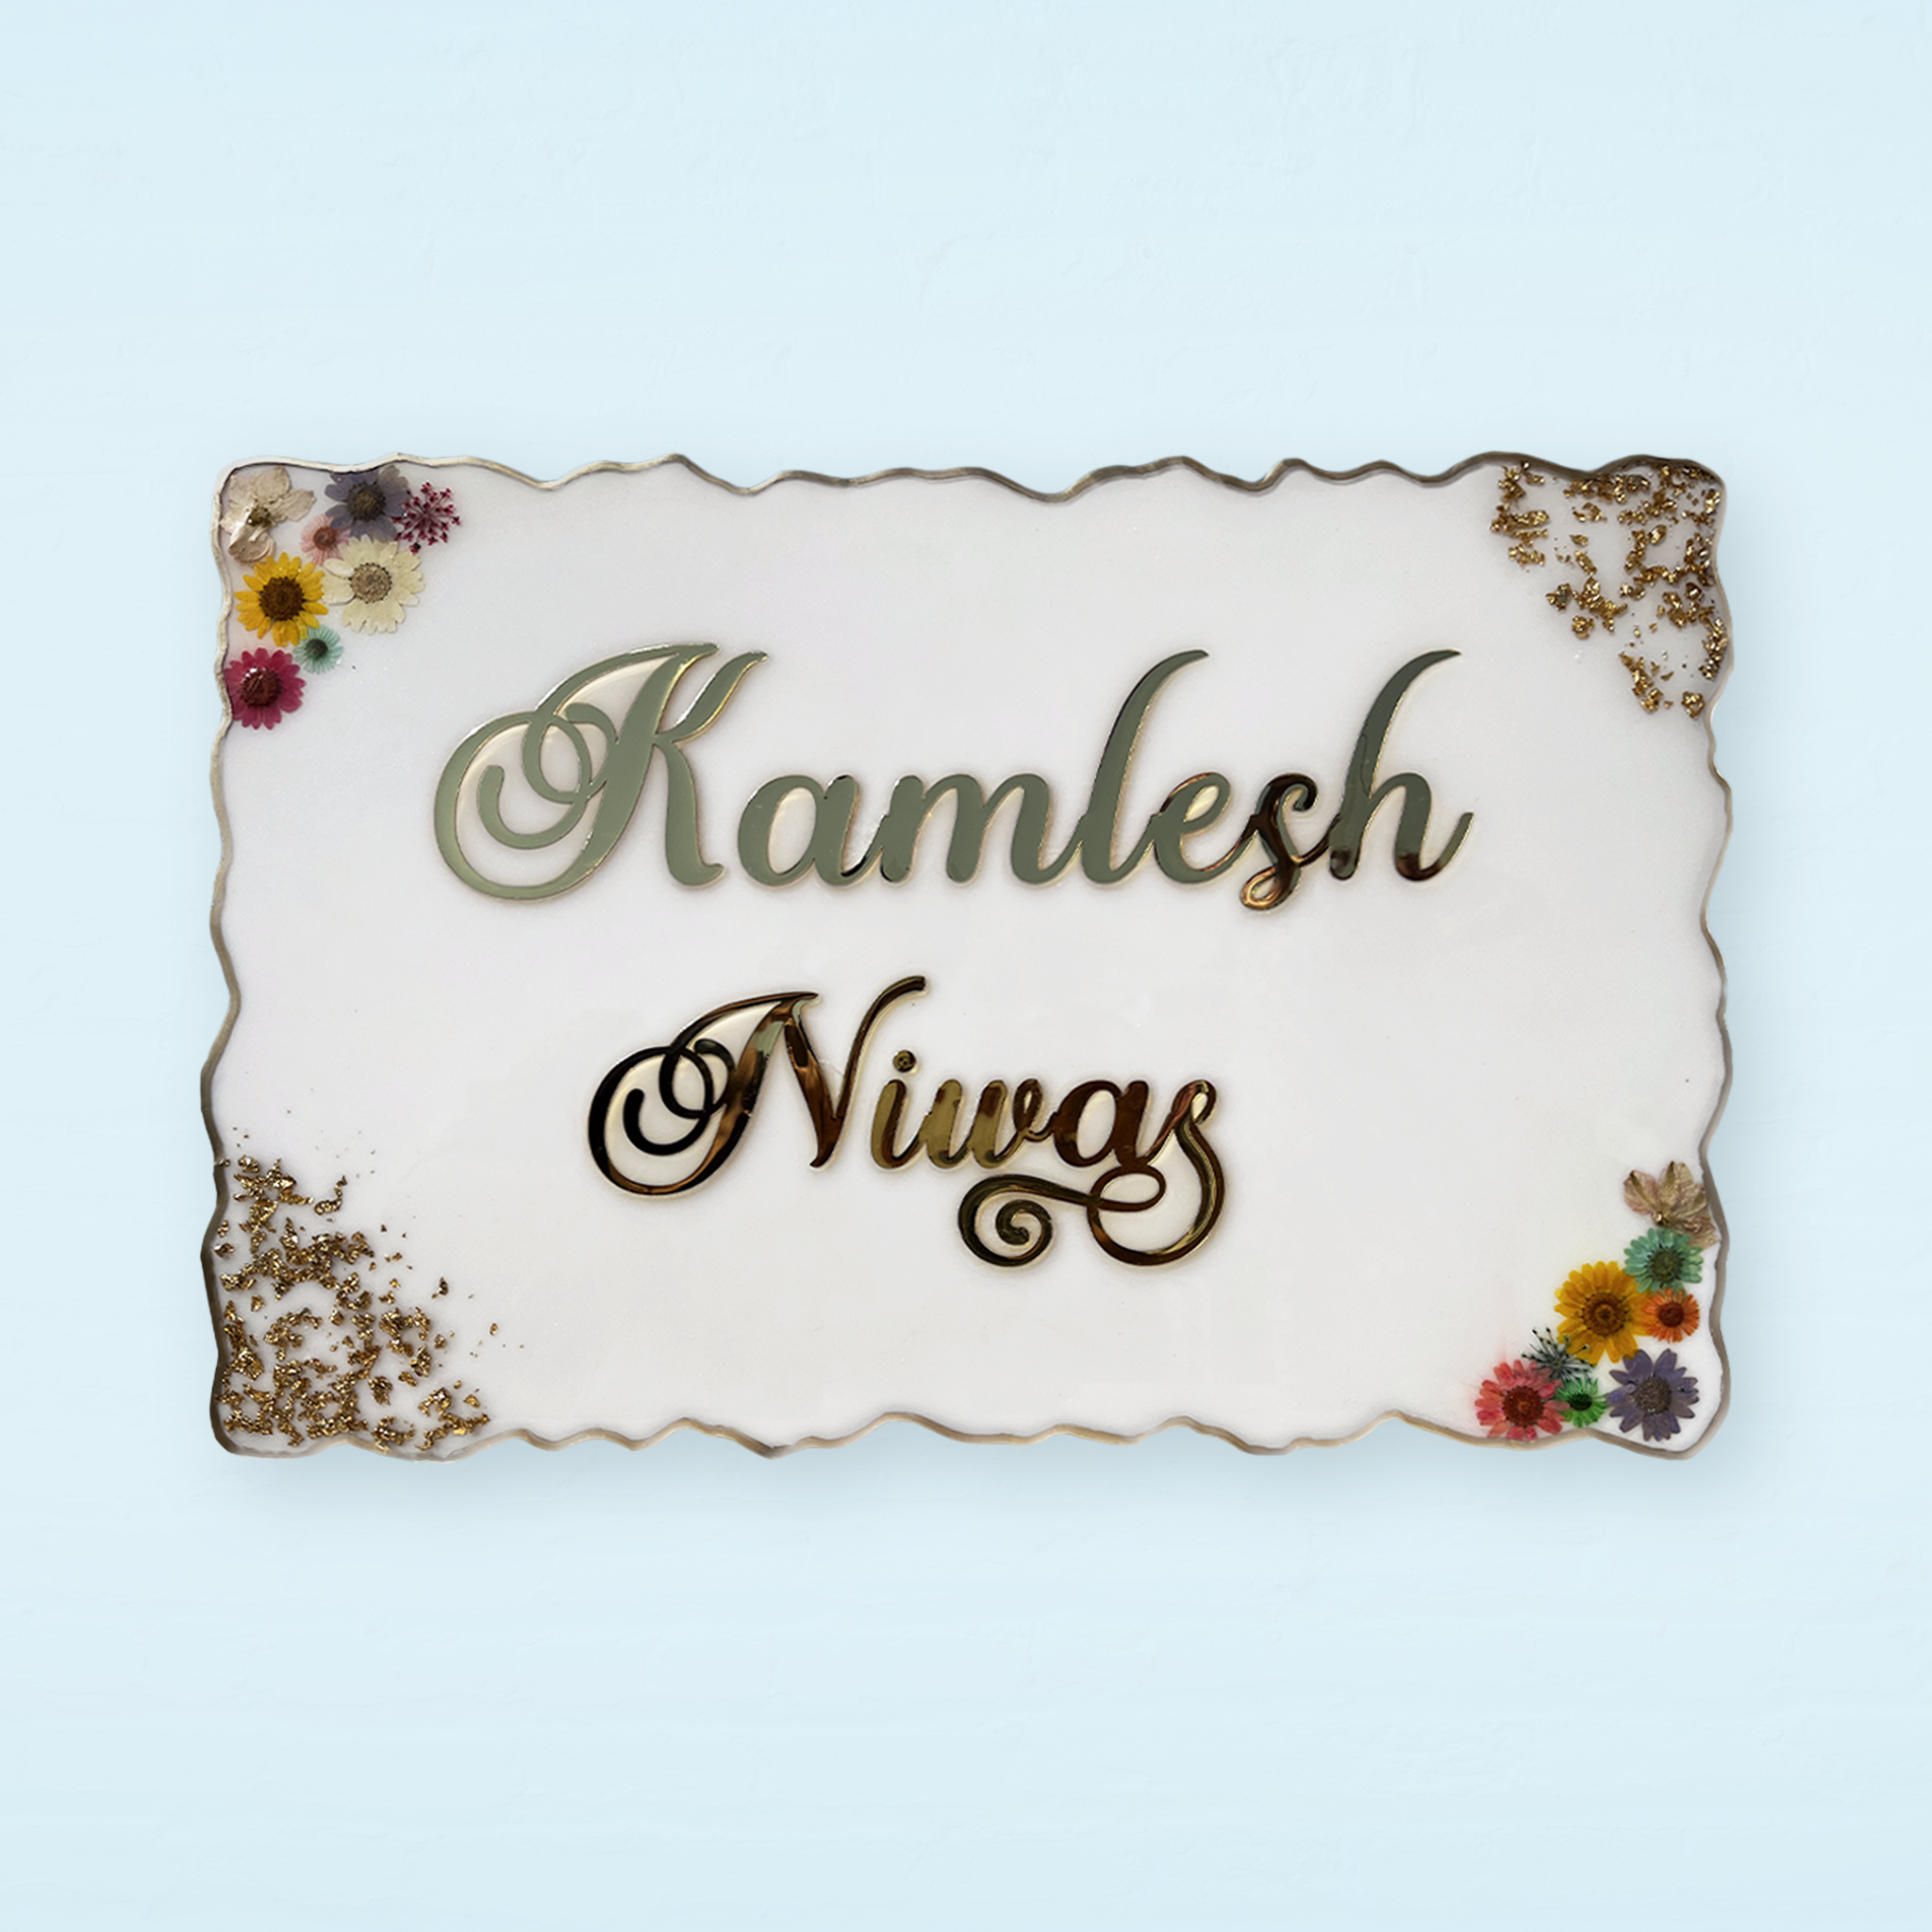 Stylish Resin Coating White Nameplate with Pressed Flowers and Flakes, Resin Nameplate for Home, House Nameplate Designs